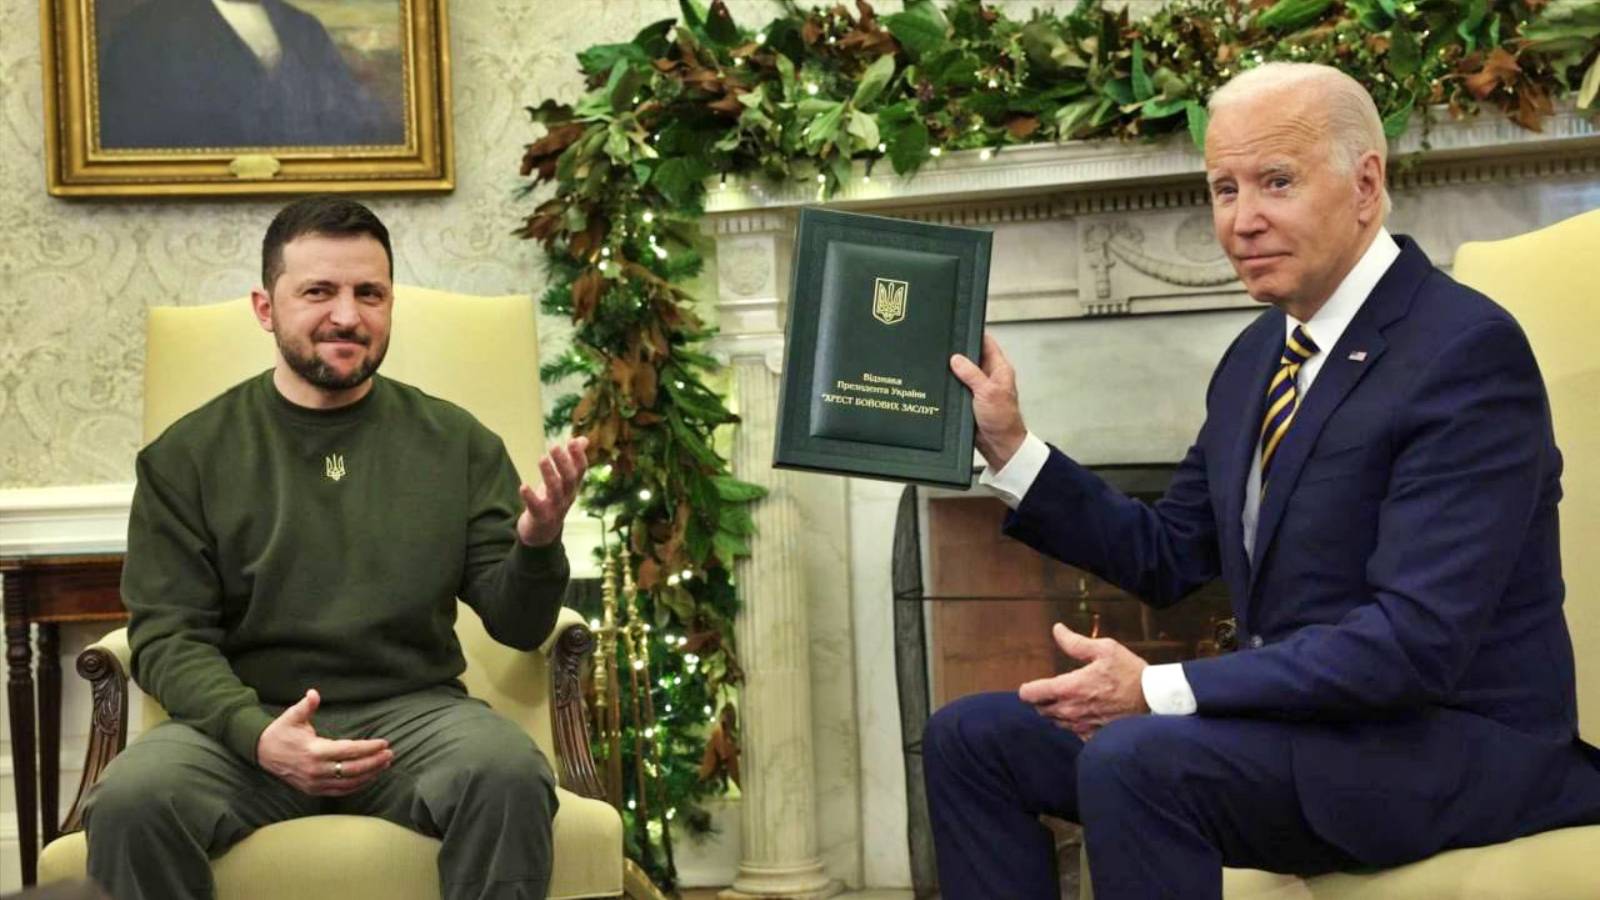 Volodymyr Zelensky was received at the White House by the US President, Joe Biden